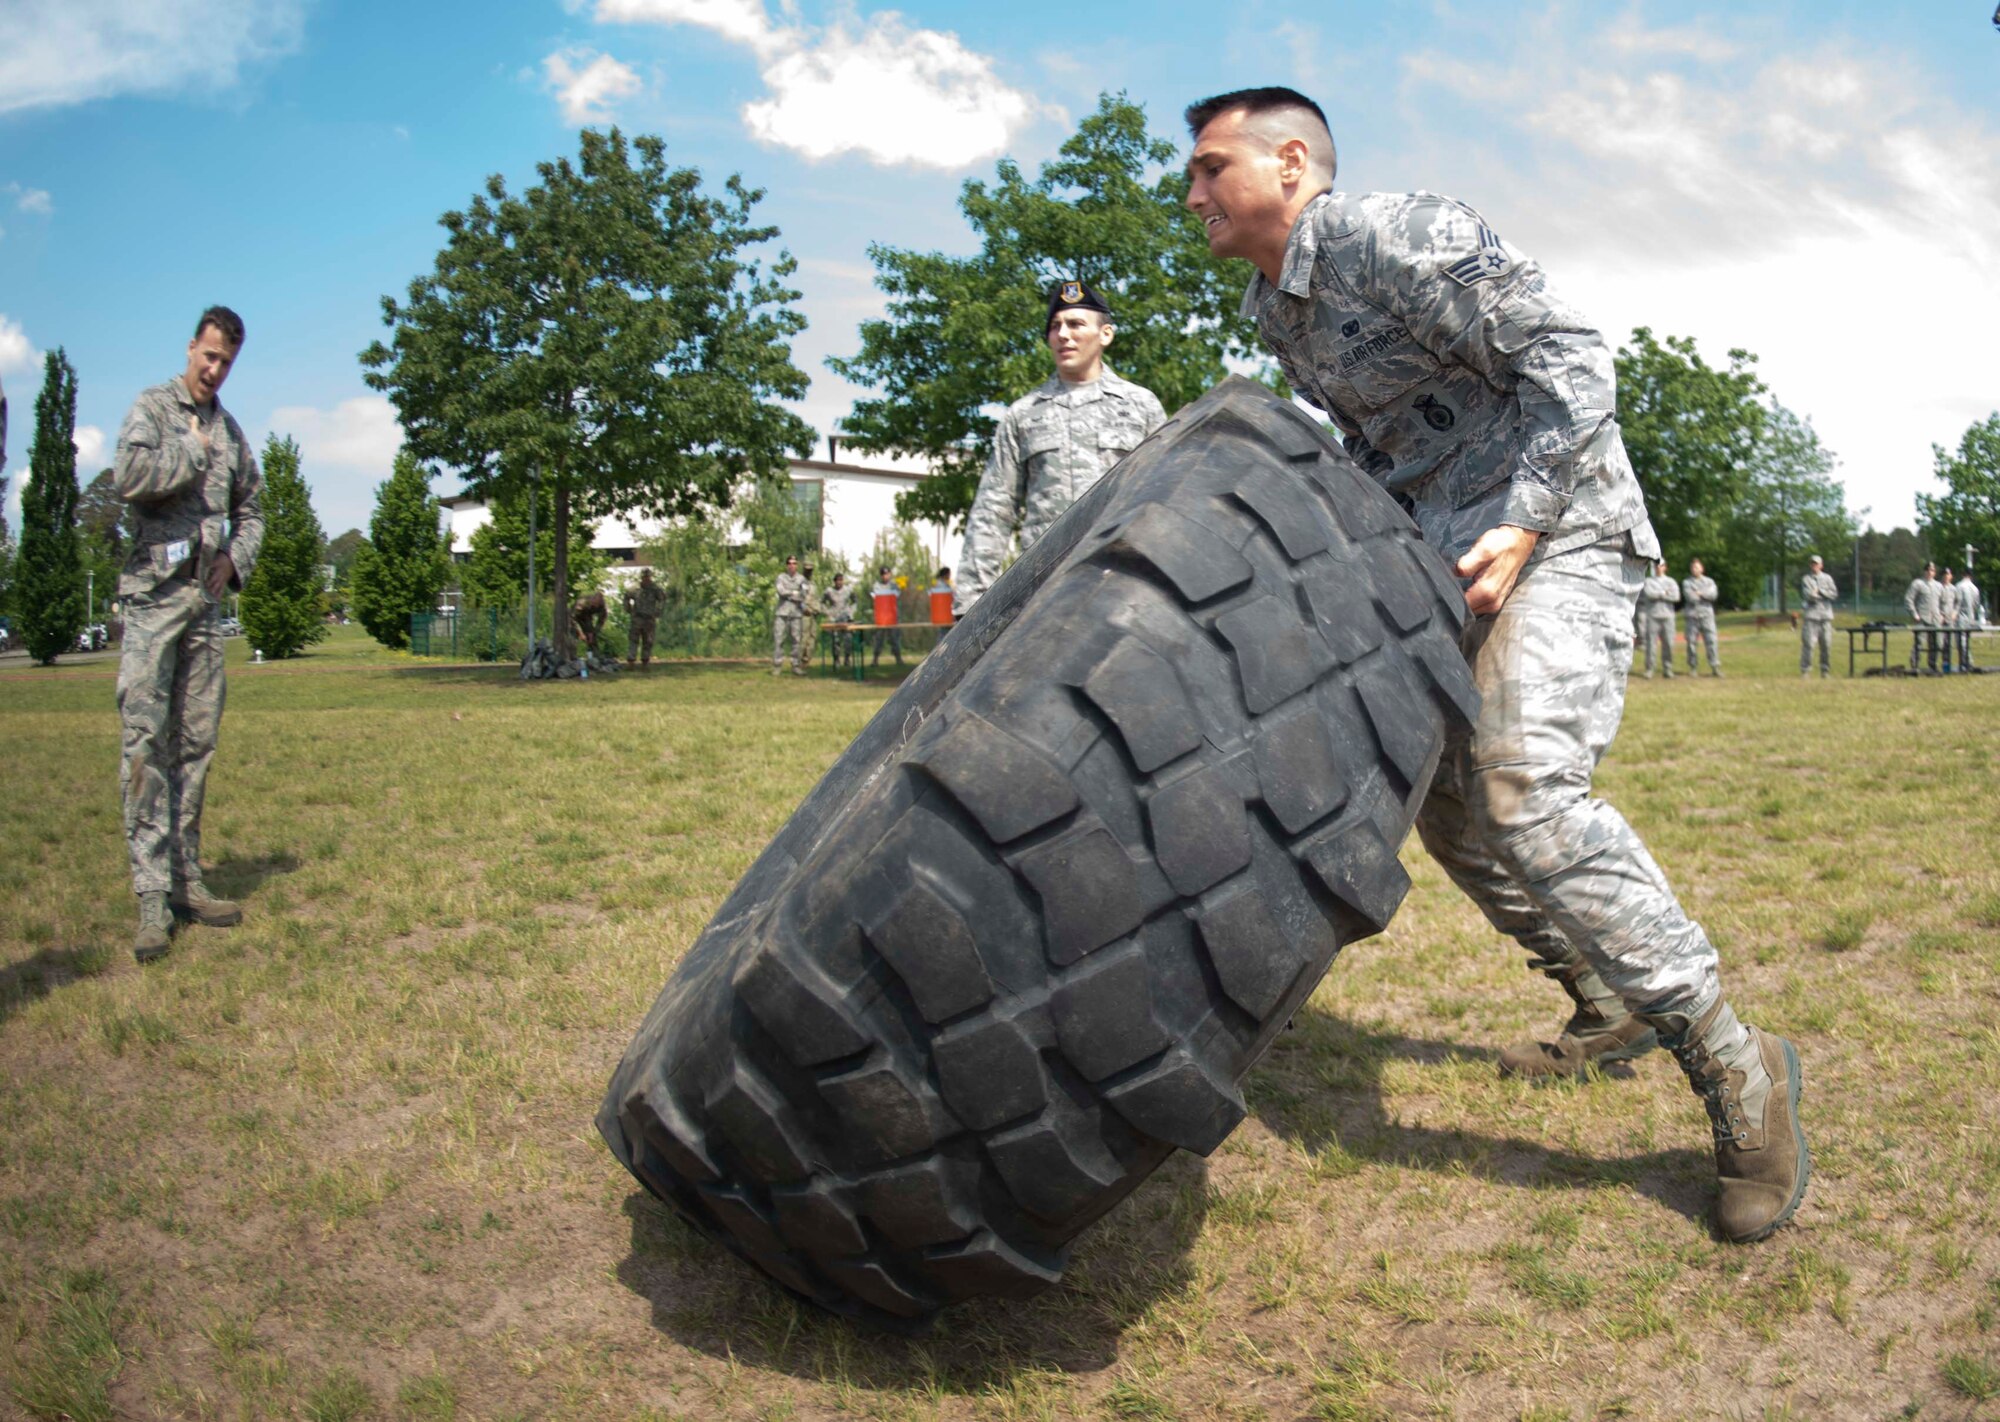 A U.S. Airman flips a tire during the Police Week 2018 Battle of the Badges competition on Ramstein Air Base, Germany, May 15, 2018. Eight law enforcement units, including the 86th Security forces Squadron, the 569th U.S. Forces Police Squadron, and the 435th Contingency Response Group, competed against each other in tests of strength, endurance, and weapons handling. (U.S. Air Force photo by Senior Airman Elizabeth Baker)